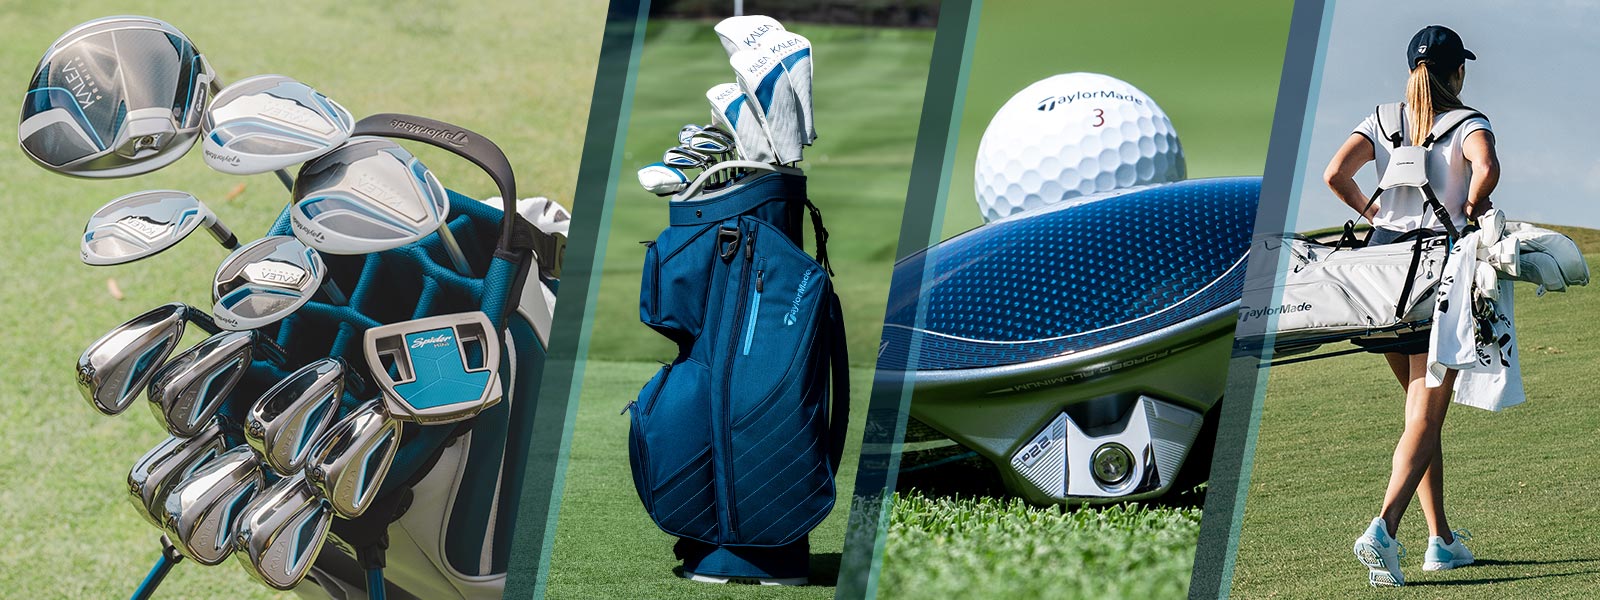 TaylorMade Golf Clubs and Equipment